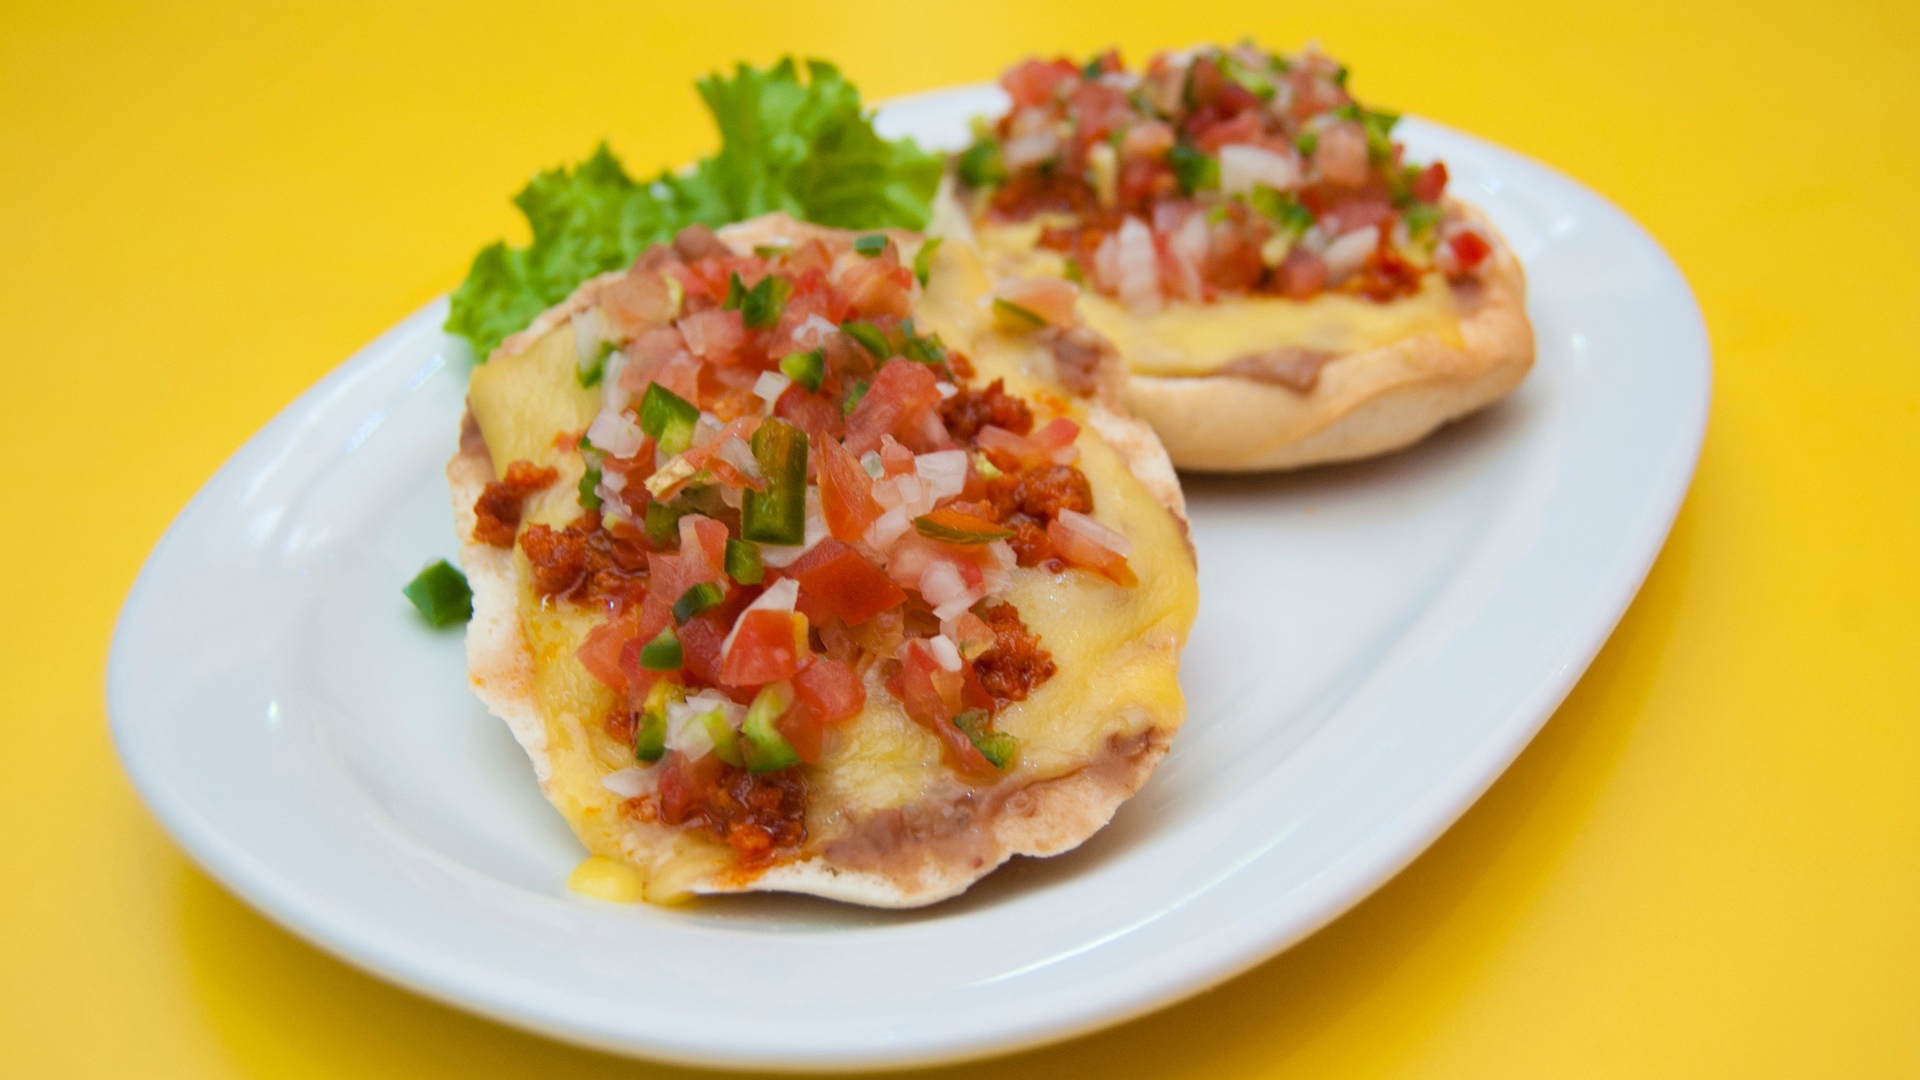 MINI MOLLETES (3) – Agave by Imperial